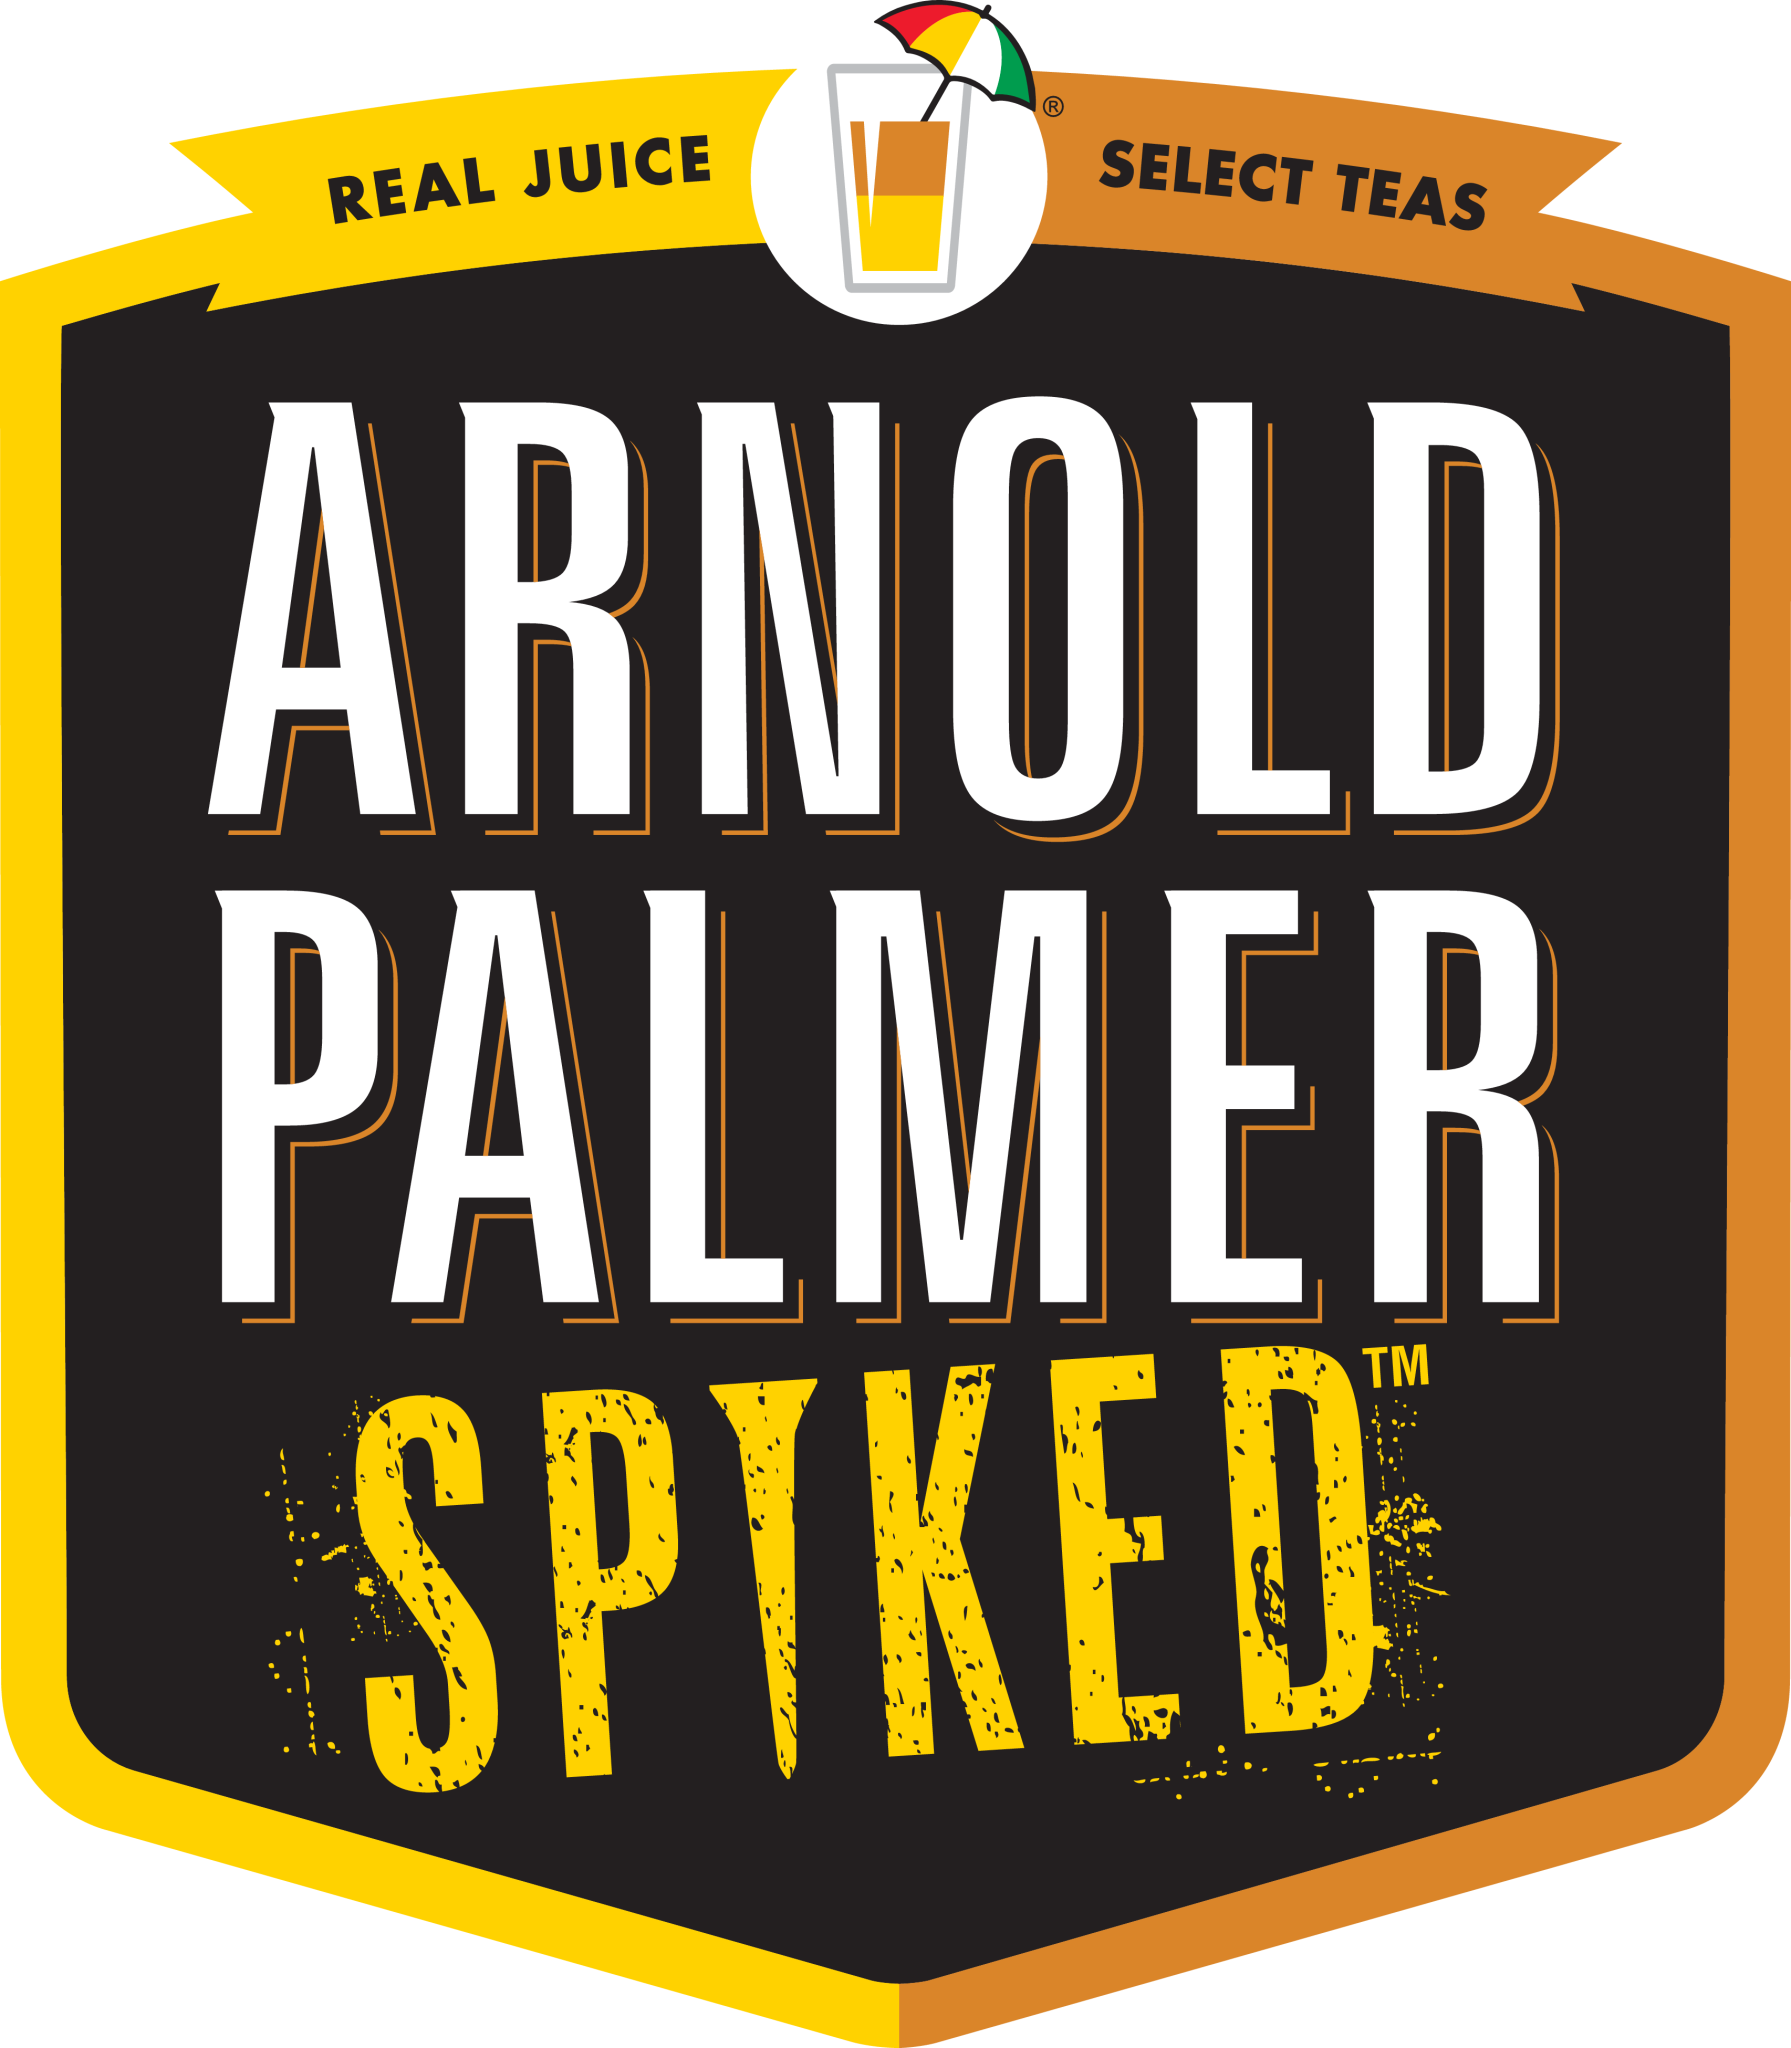 ARNOLD PALMER SPIKED